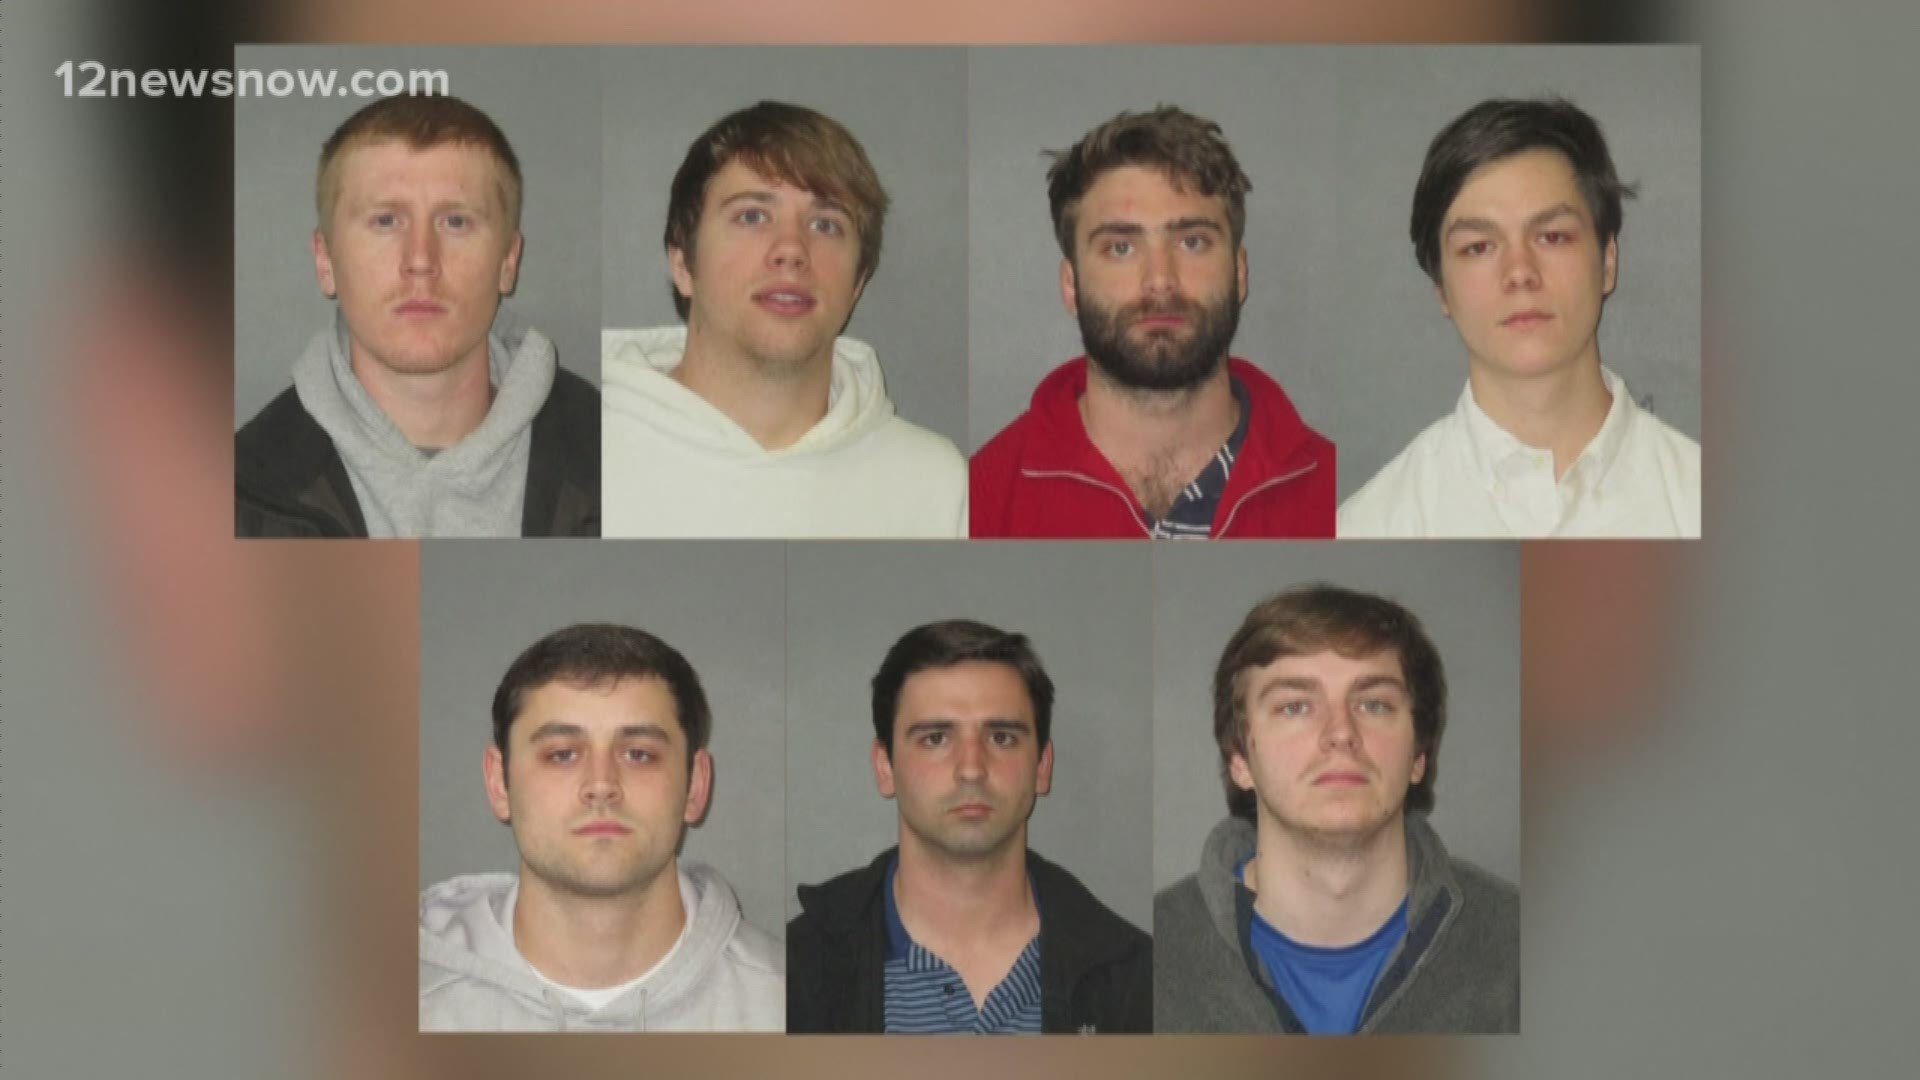 Nine members of the Delta Kappa Epsilon fraternity are arrested after the death of a fellow student two years ago. The students are accused of hazing, including forcing pledges to lay on broken glass while being urinated on, beaten with a metal pipe, burned with cigarettes, and kicked by steel-toed boots.